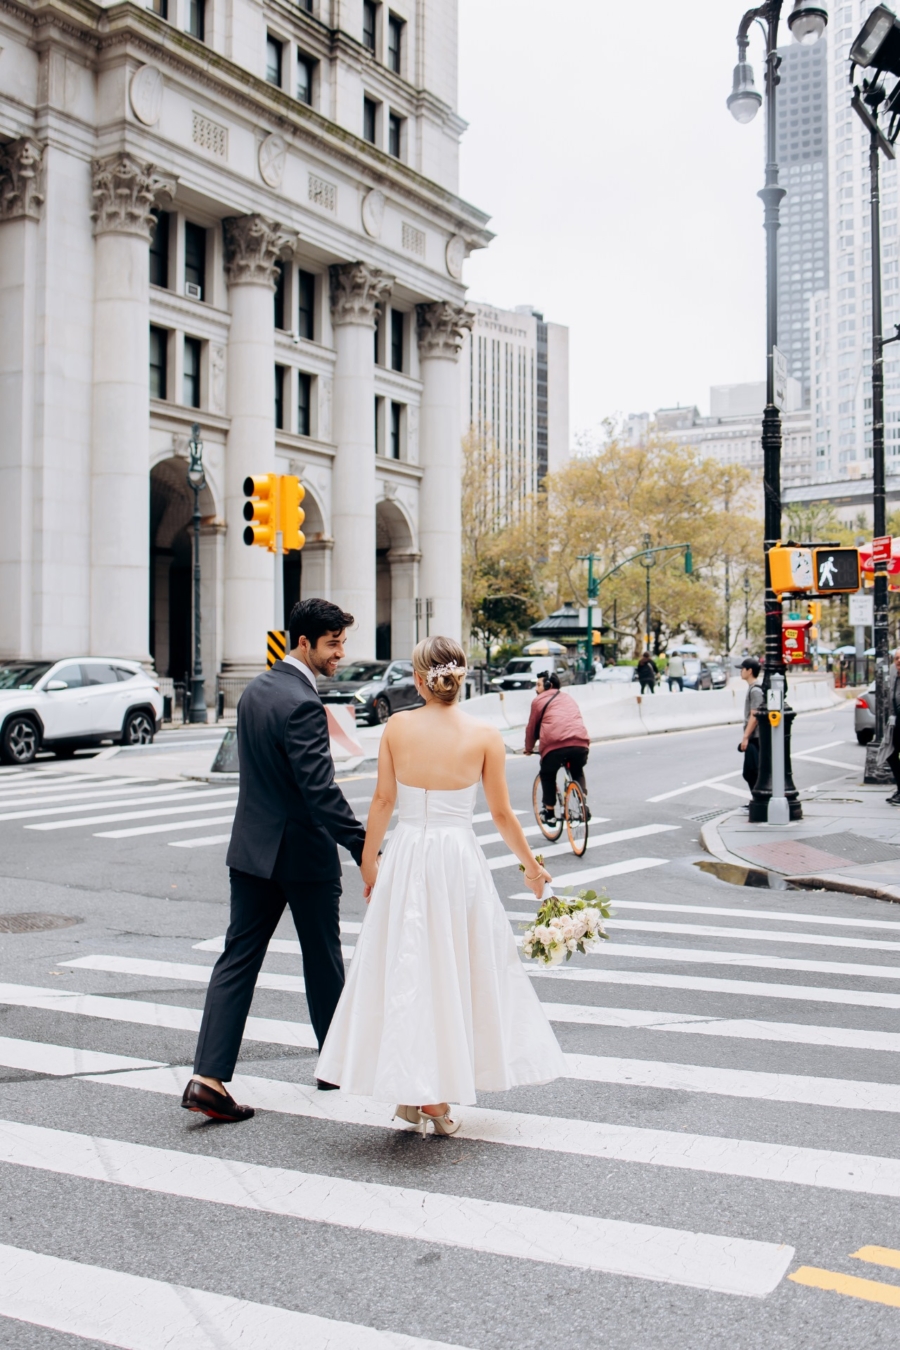 Engagement photos in new york city